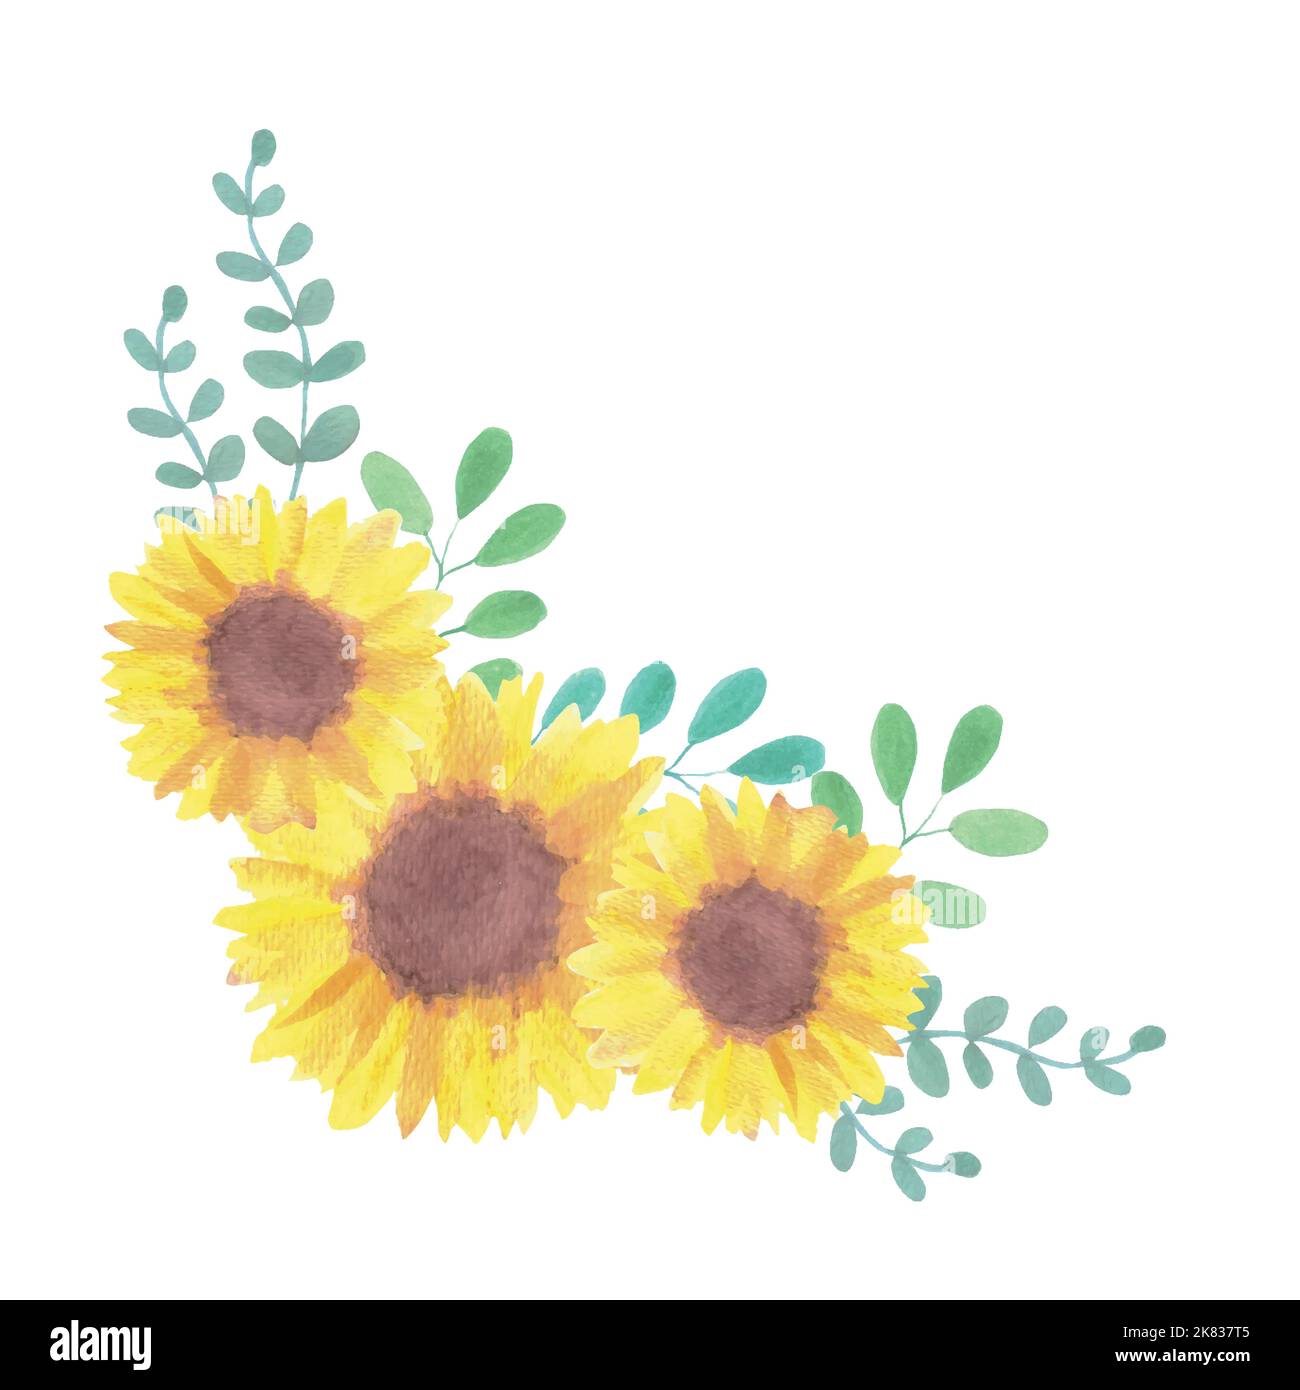 Sunflowers and leaves floral decoration Stock Vector